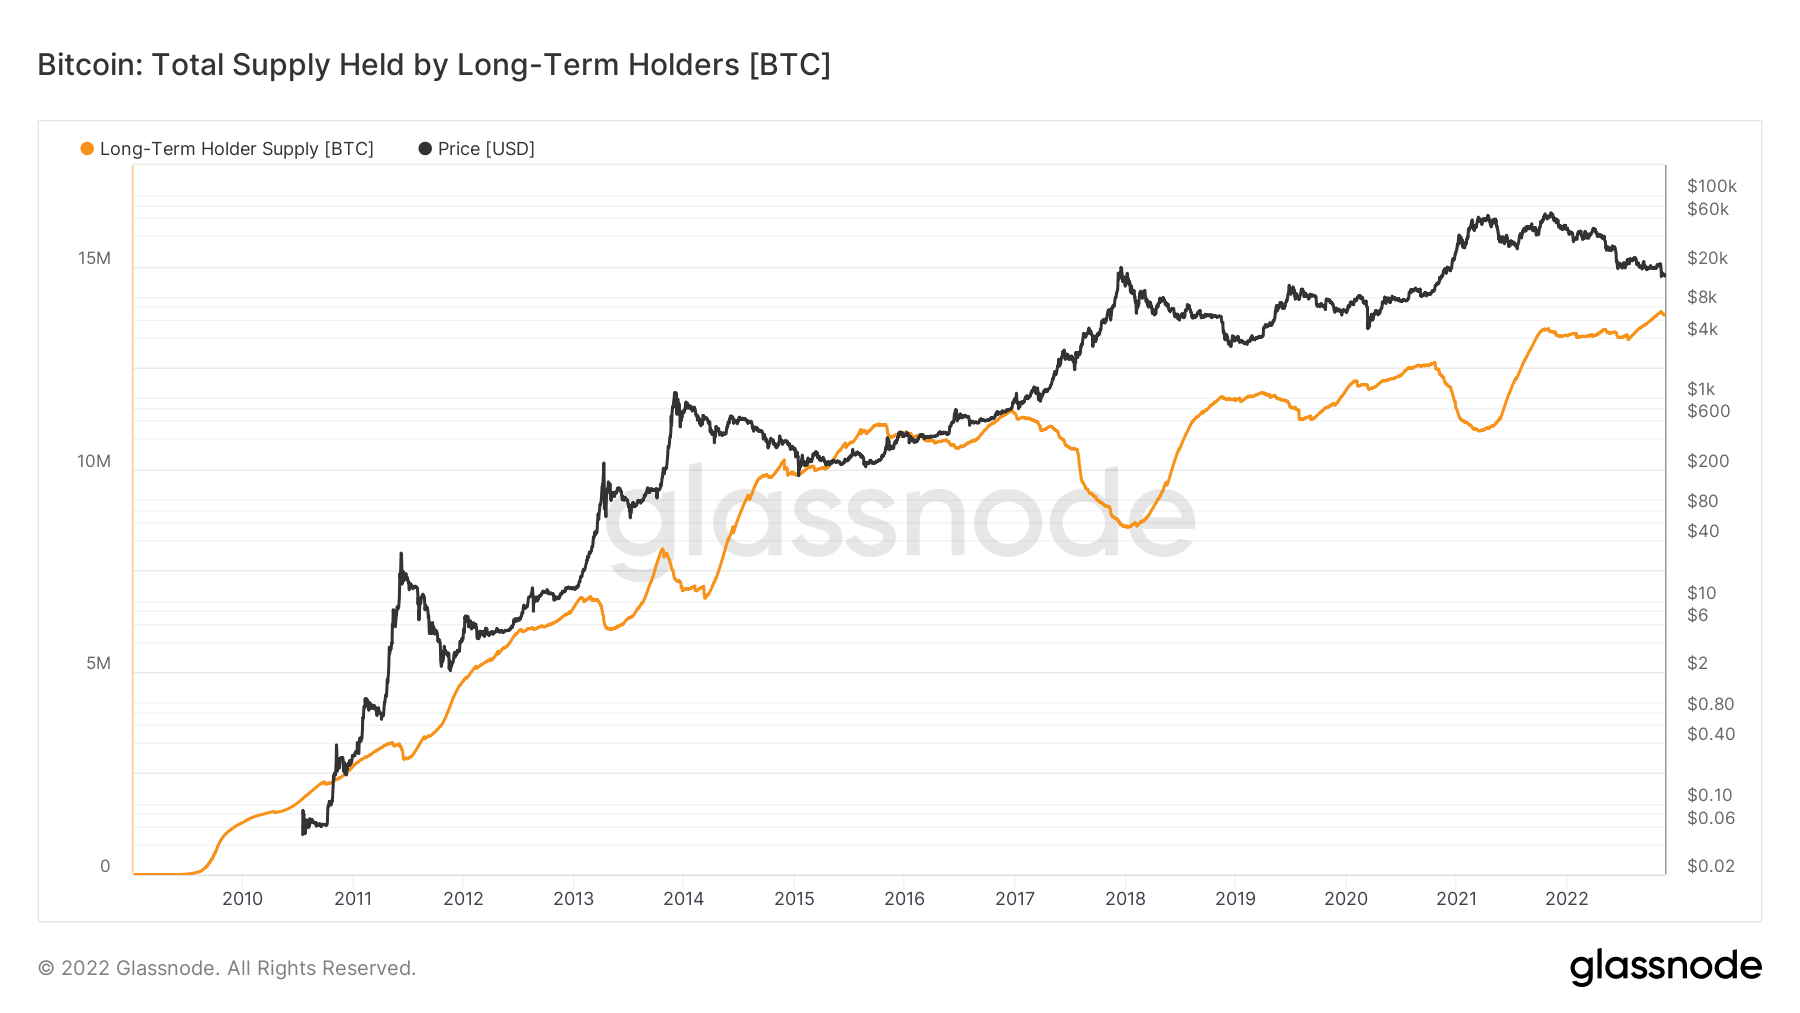 Bitcoin: total supply held by long-term holders